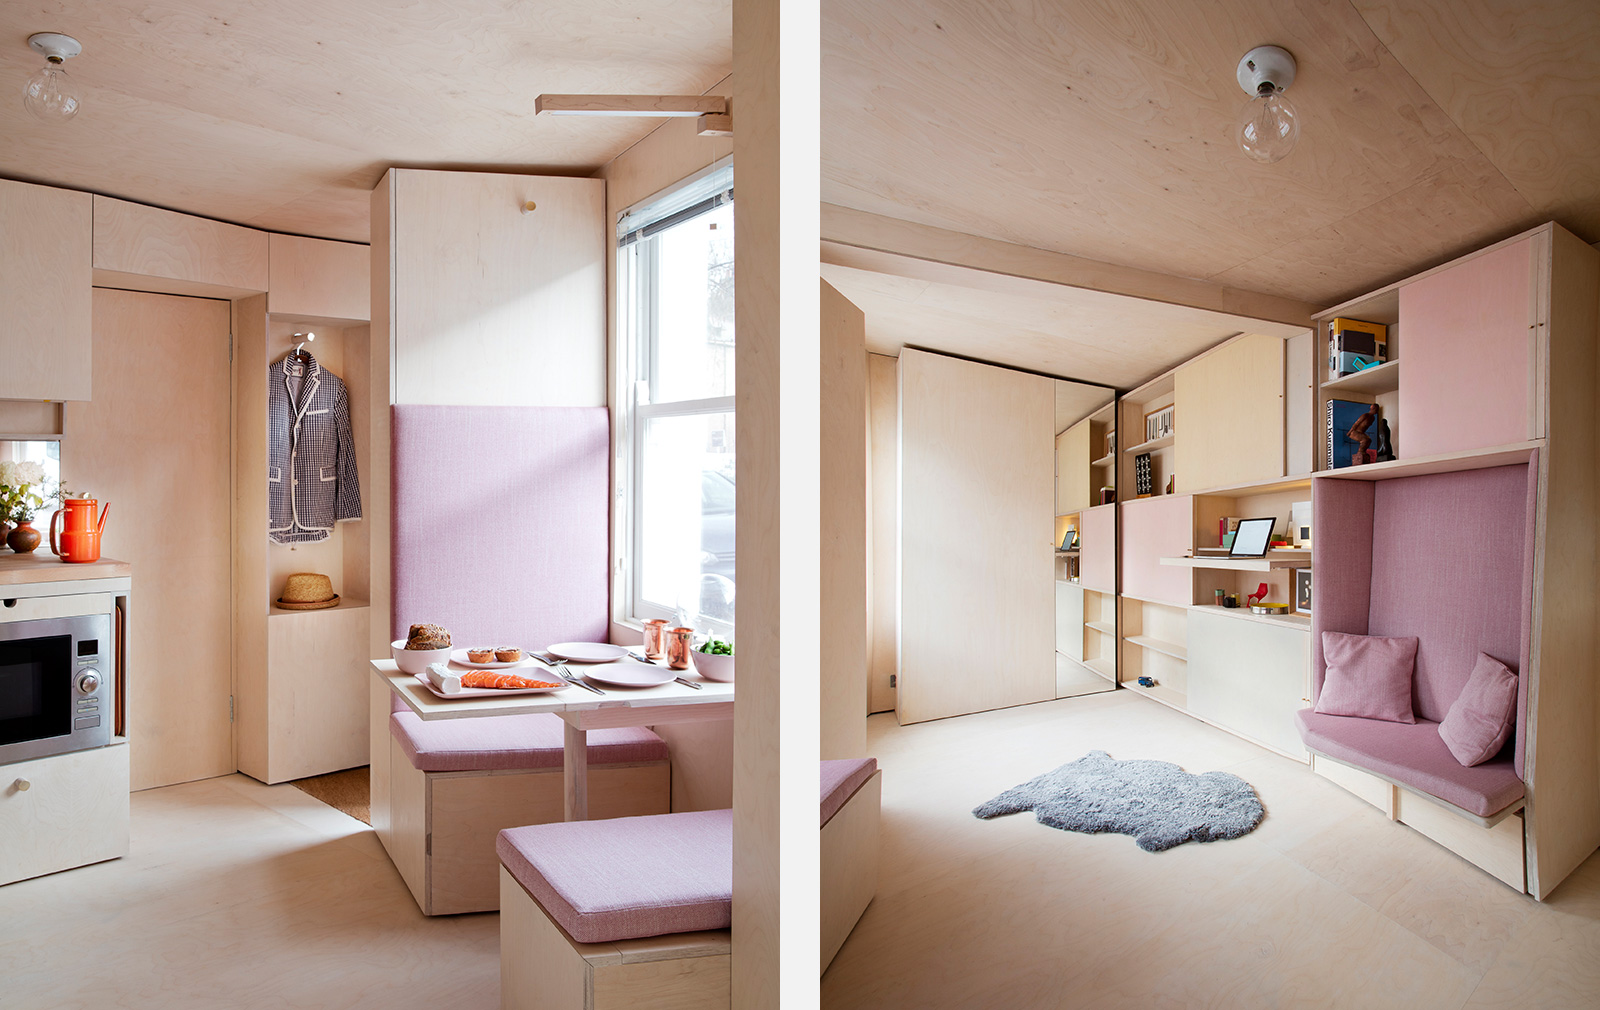 Micro home apartment designed by Courtesy of Studiomama